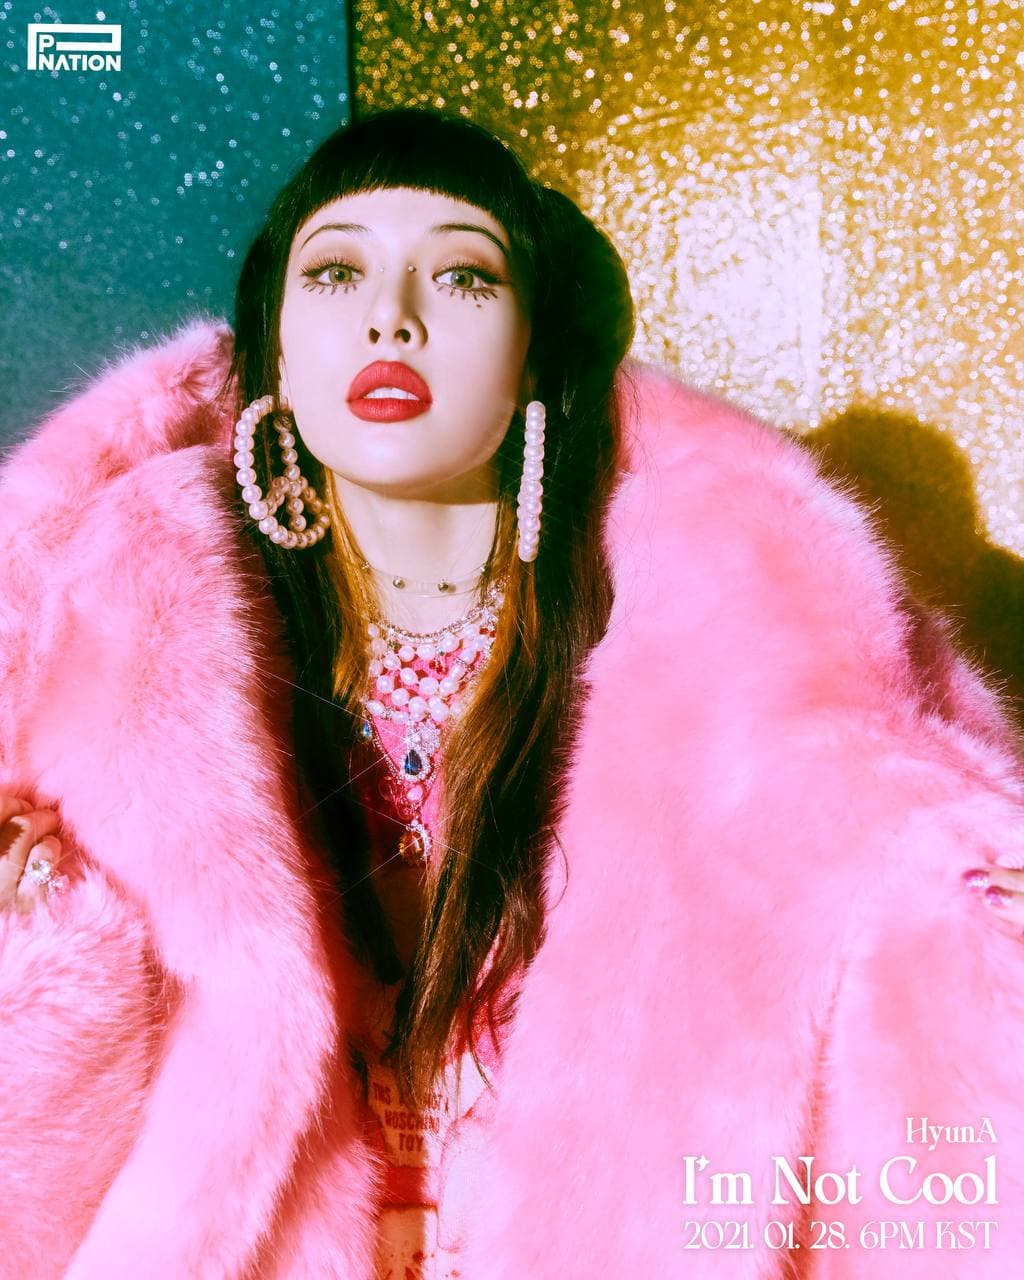 Watch: HyunA Says “I'm Not Cool” In Colorful Comeback MV